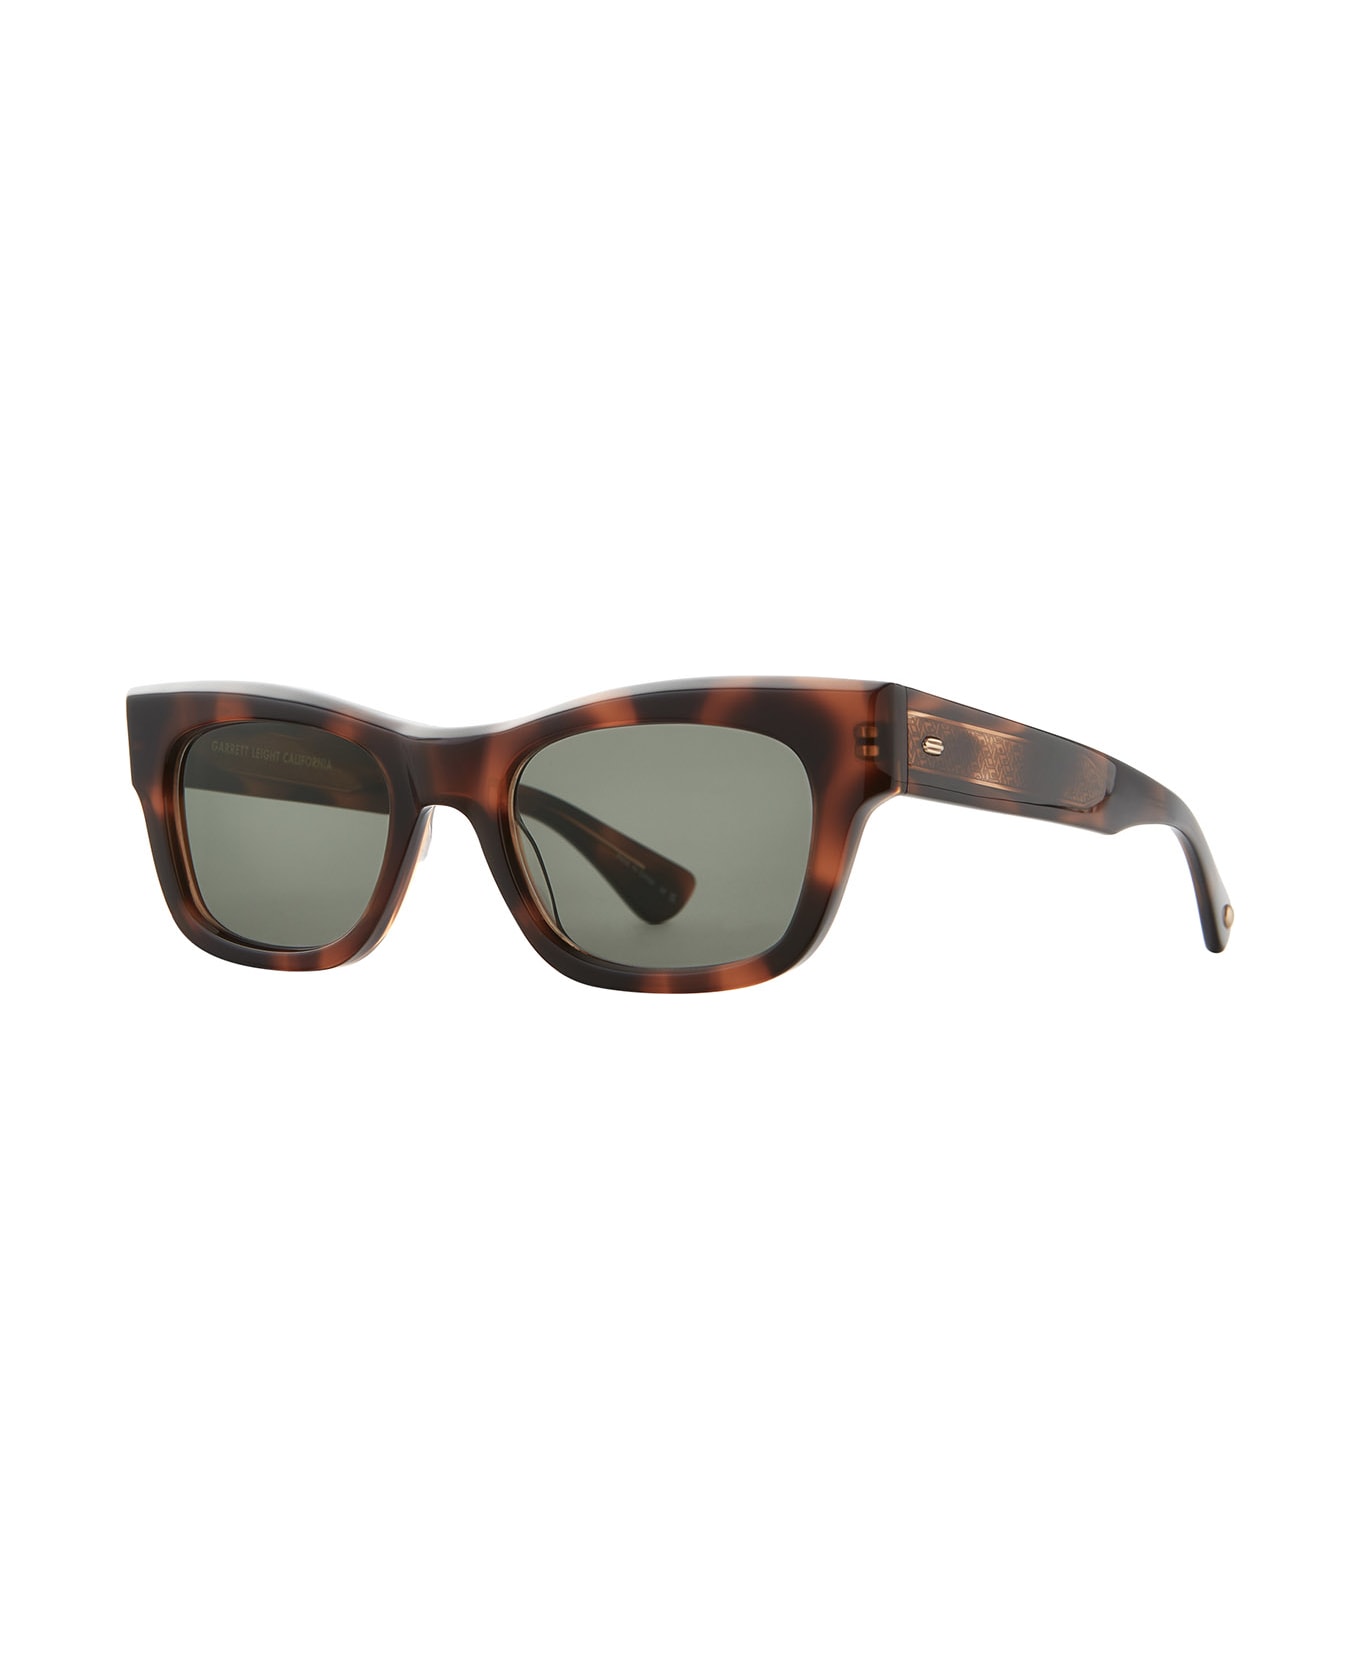 Garrett Leight Woz Sun Spotted Brown Shell Sunglasses - Spotted Brown Shell